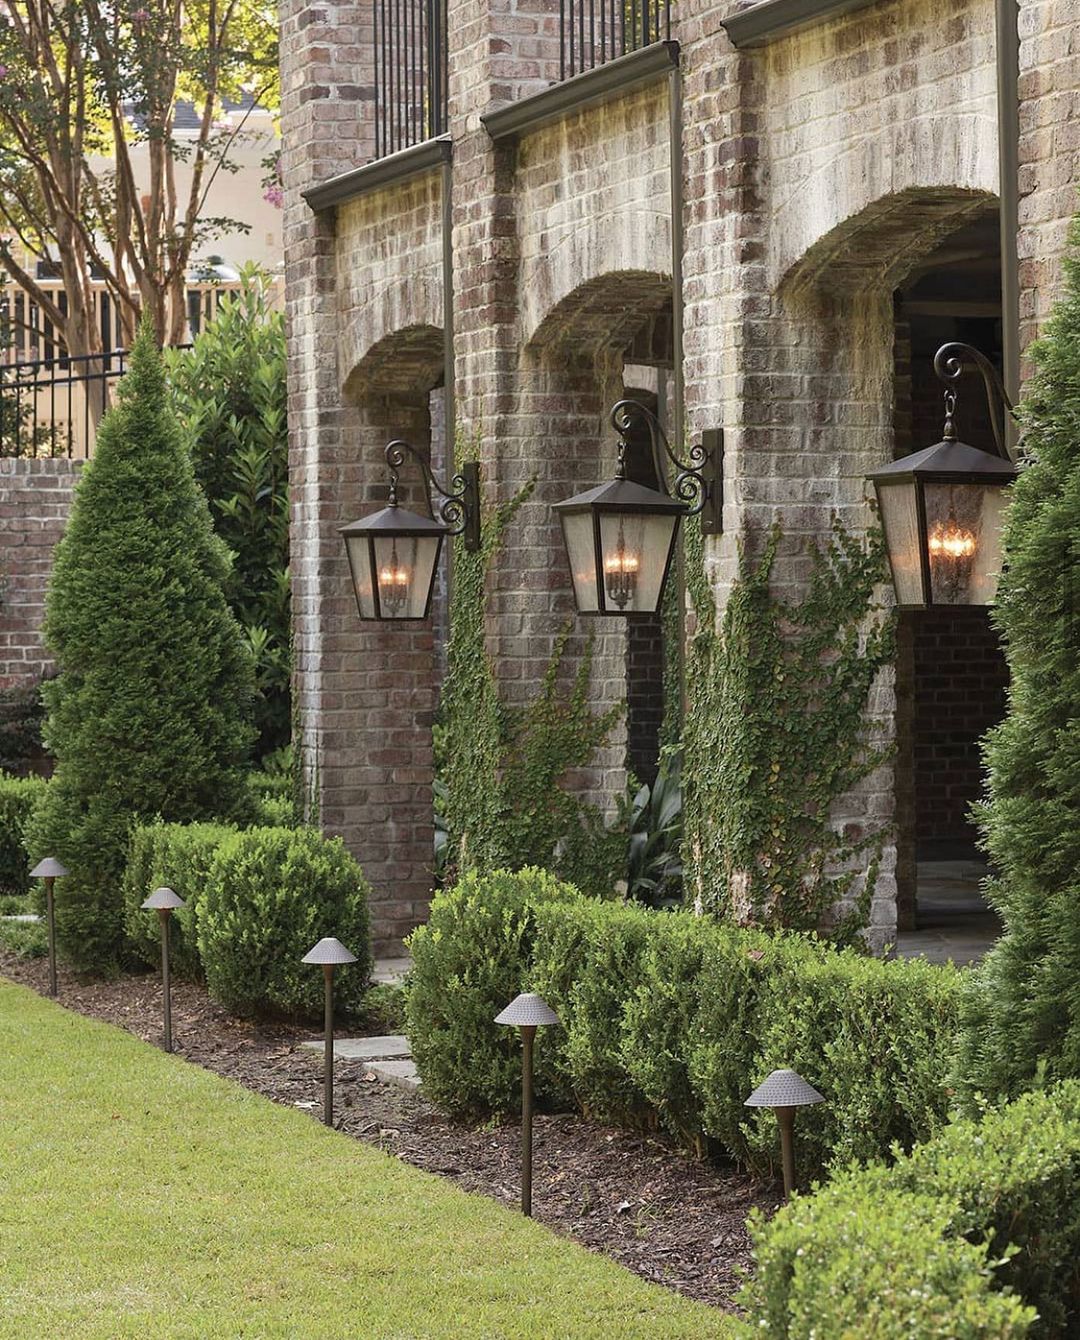 Large outdoor wall sconces on a brick home with green hedges. Photo by Instagram user @mylightingsource